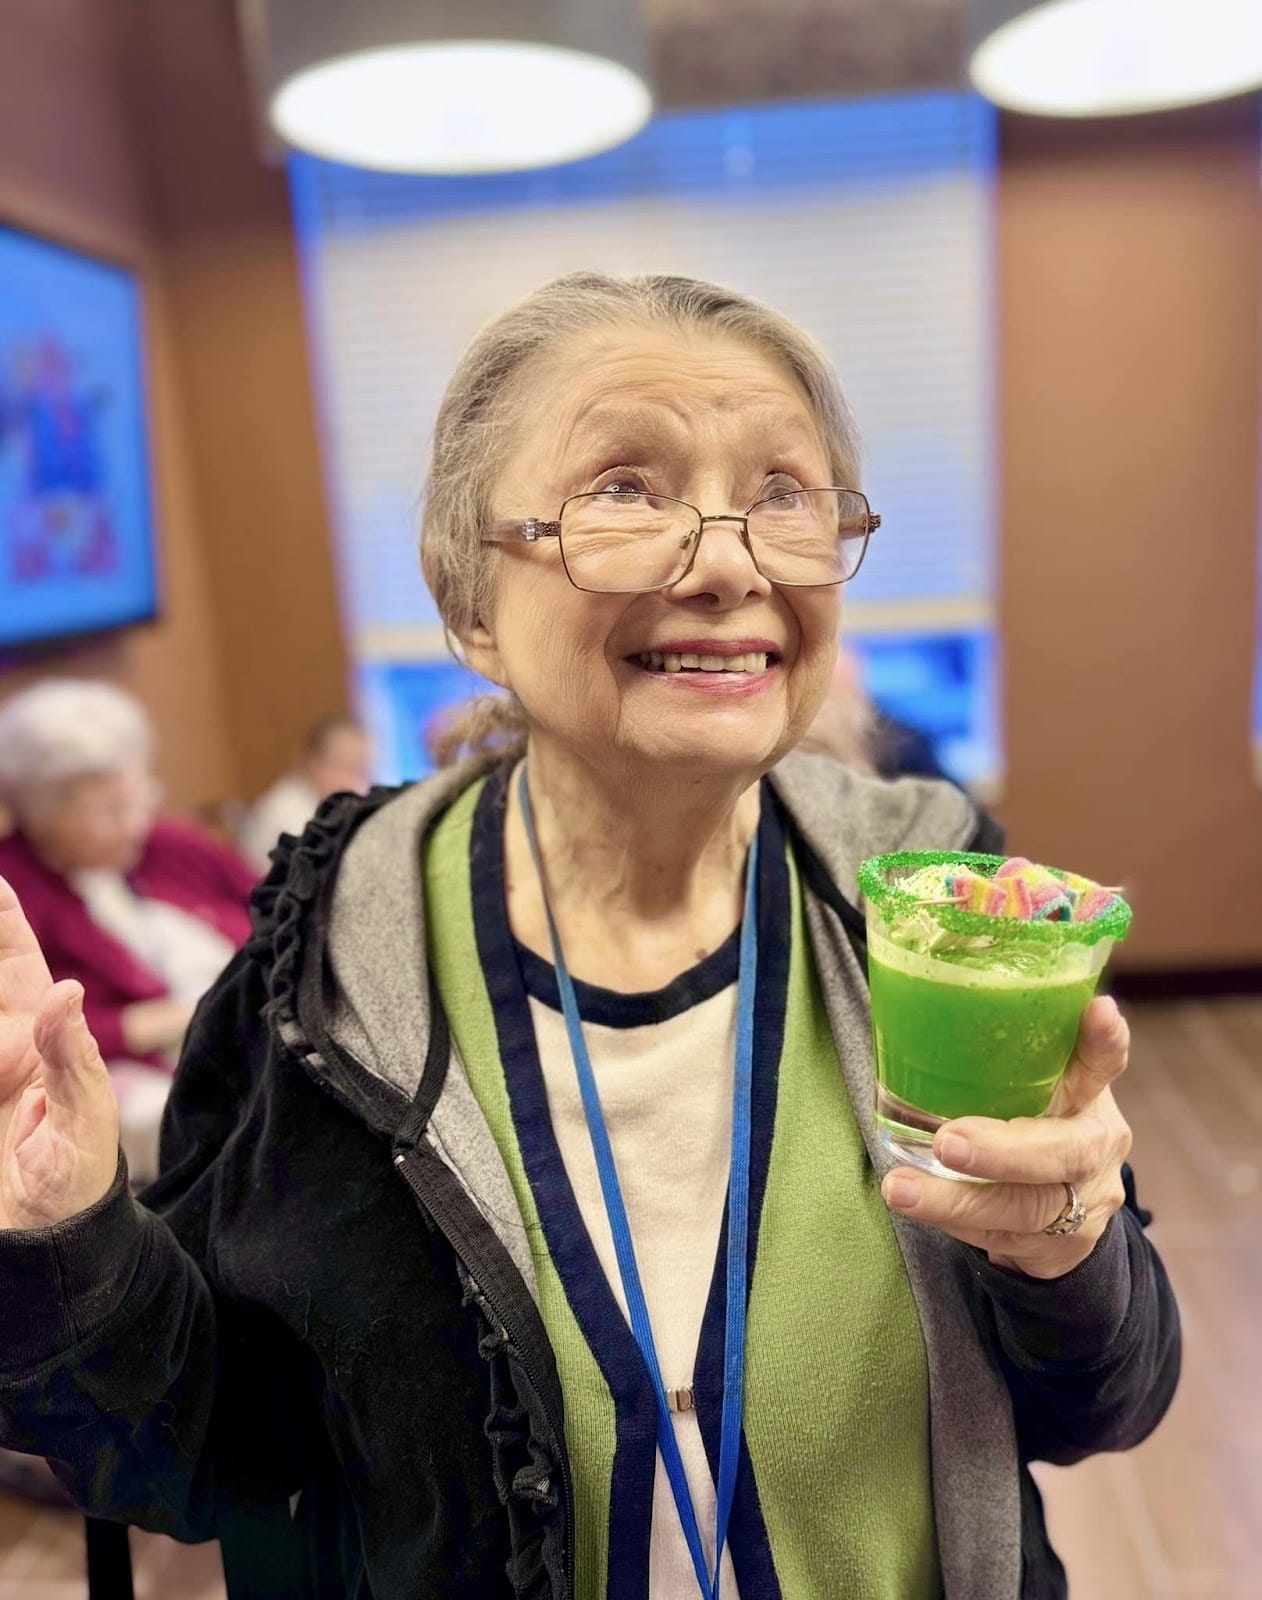 A senior citizen smiling and looking up while holding a special drink